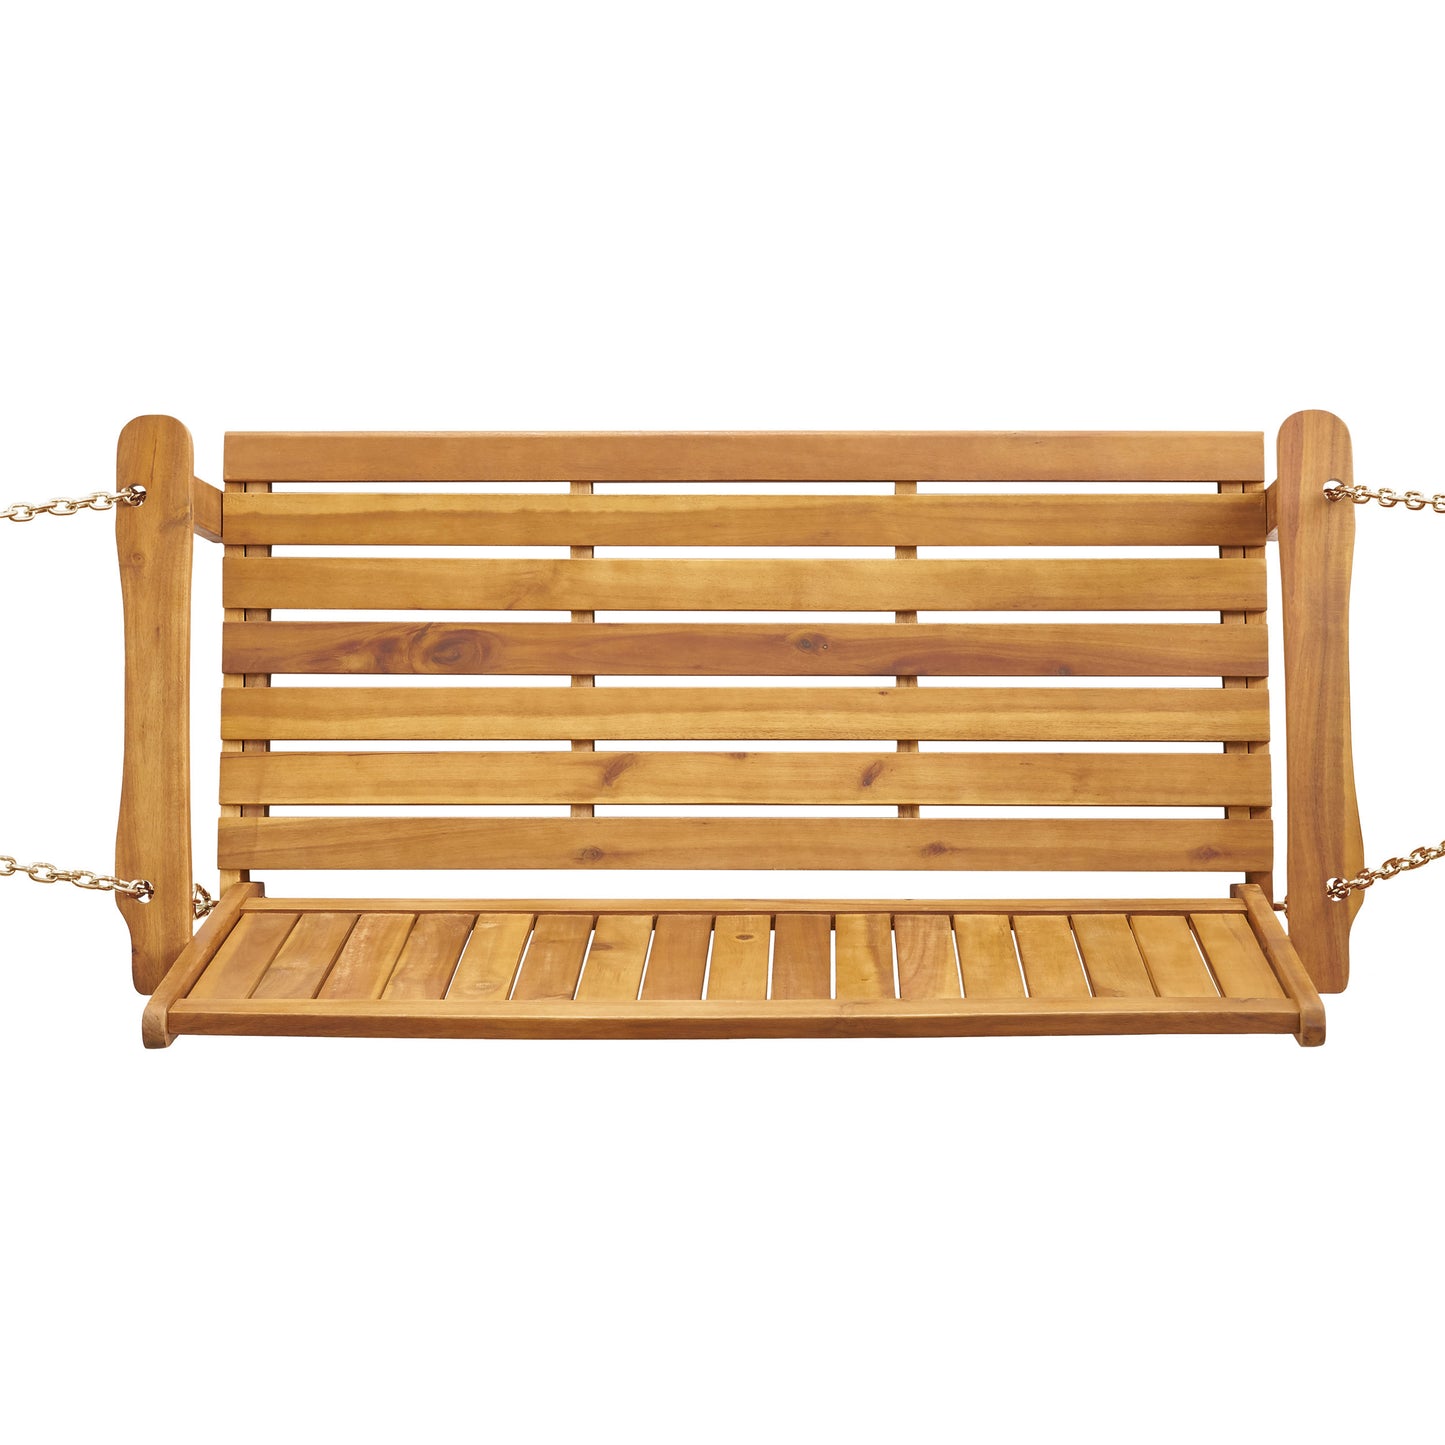 Lilith Outdoor Aacia Wood Porch Swing